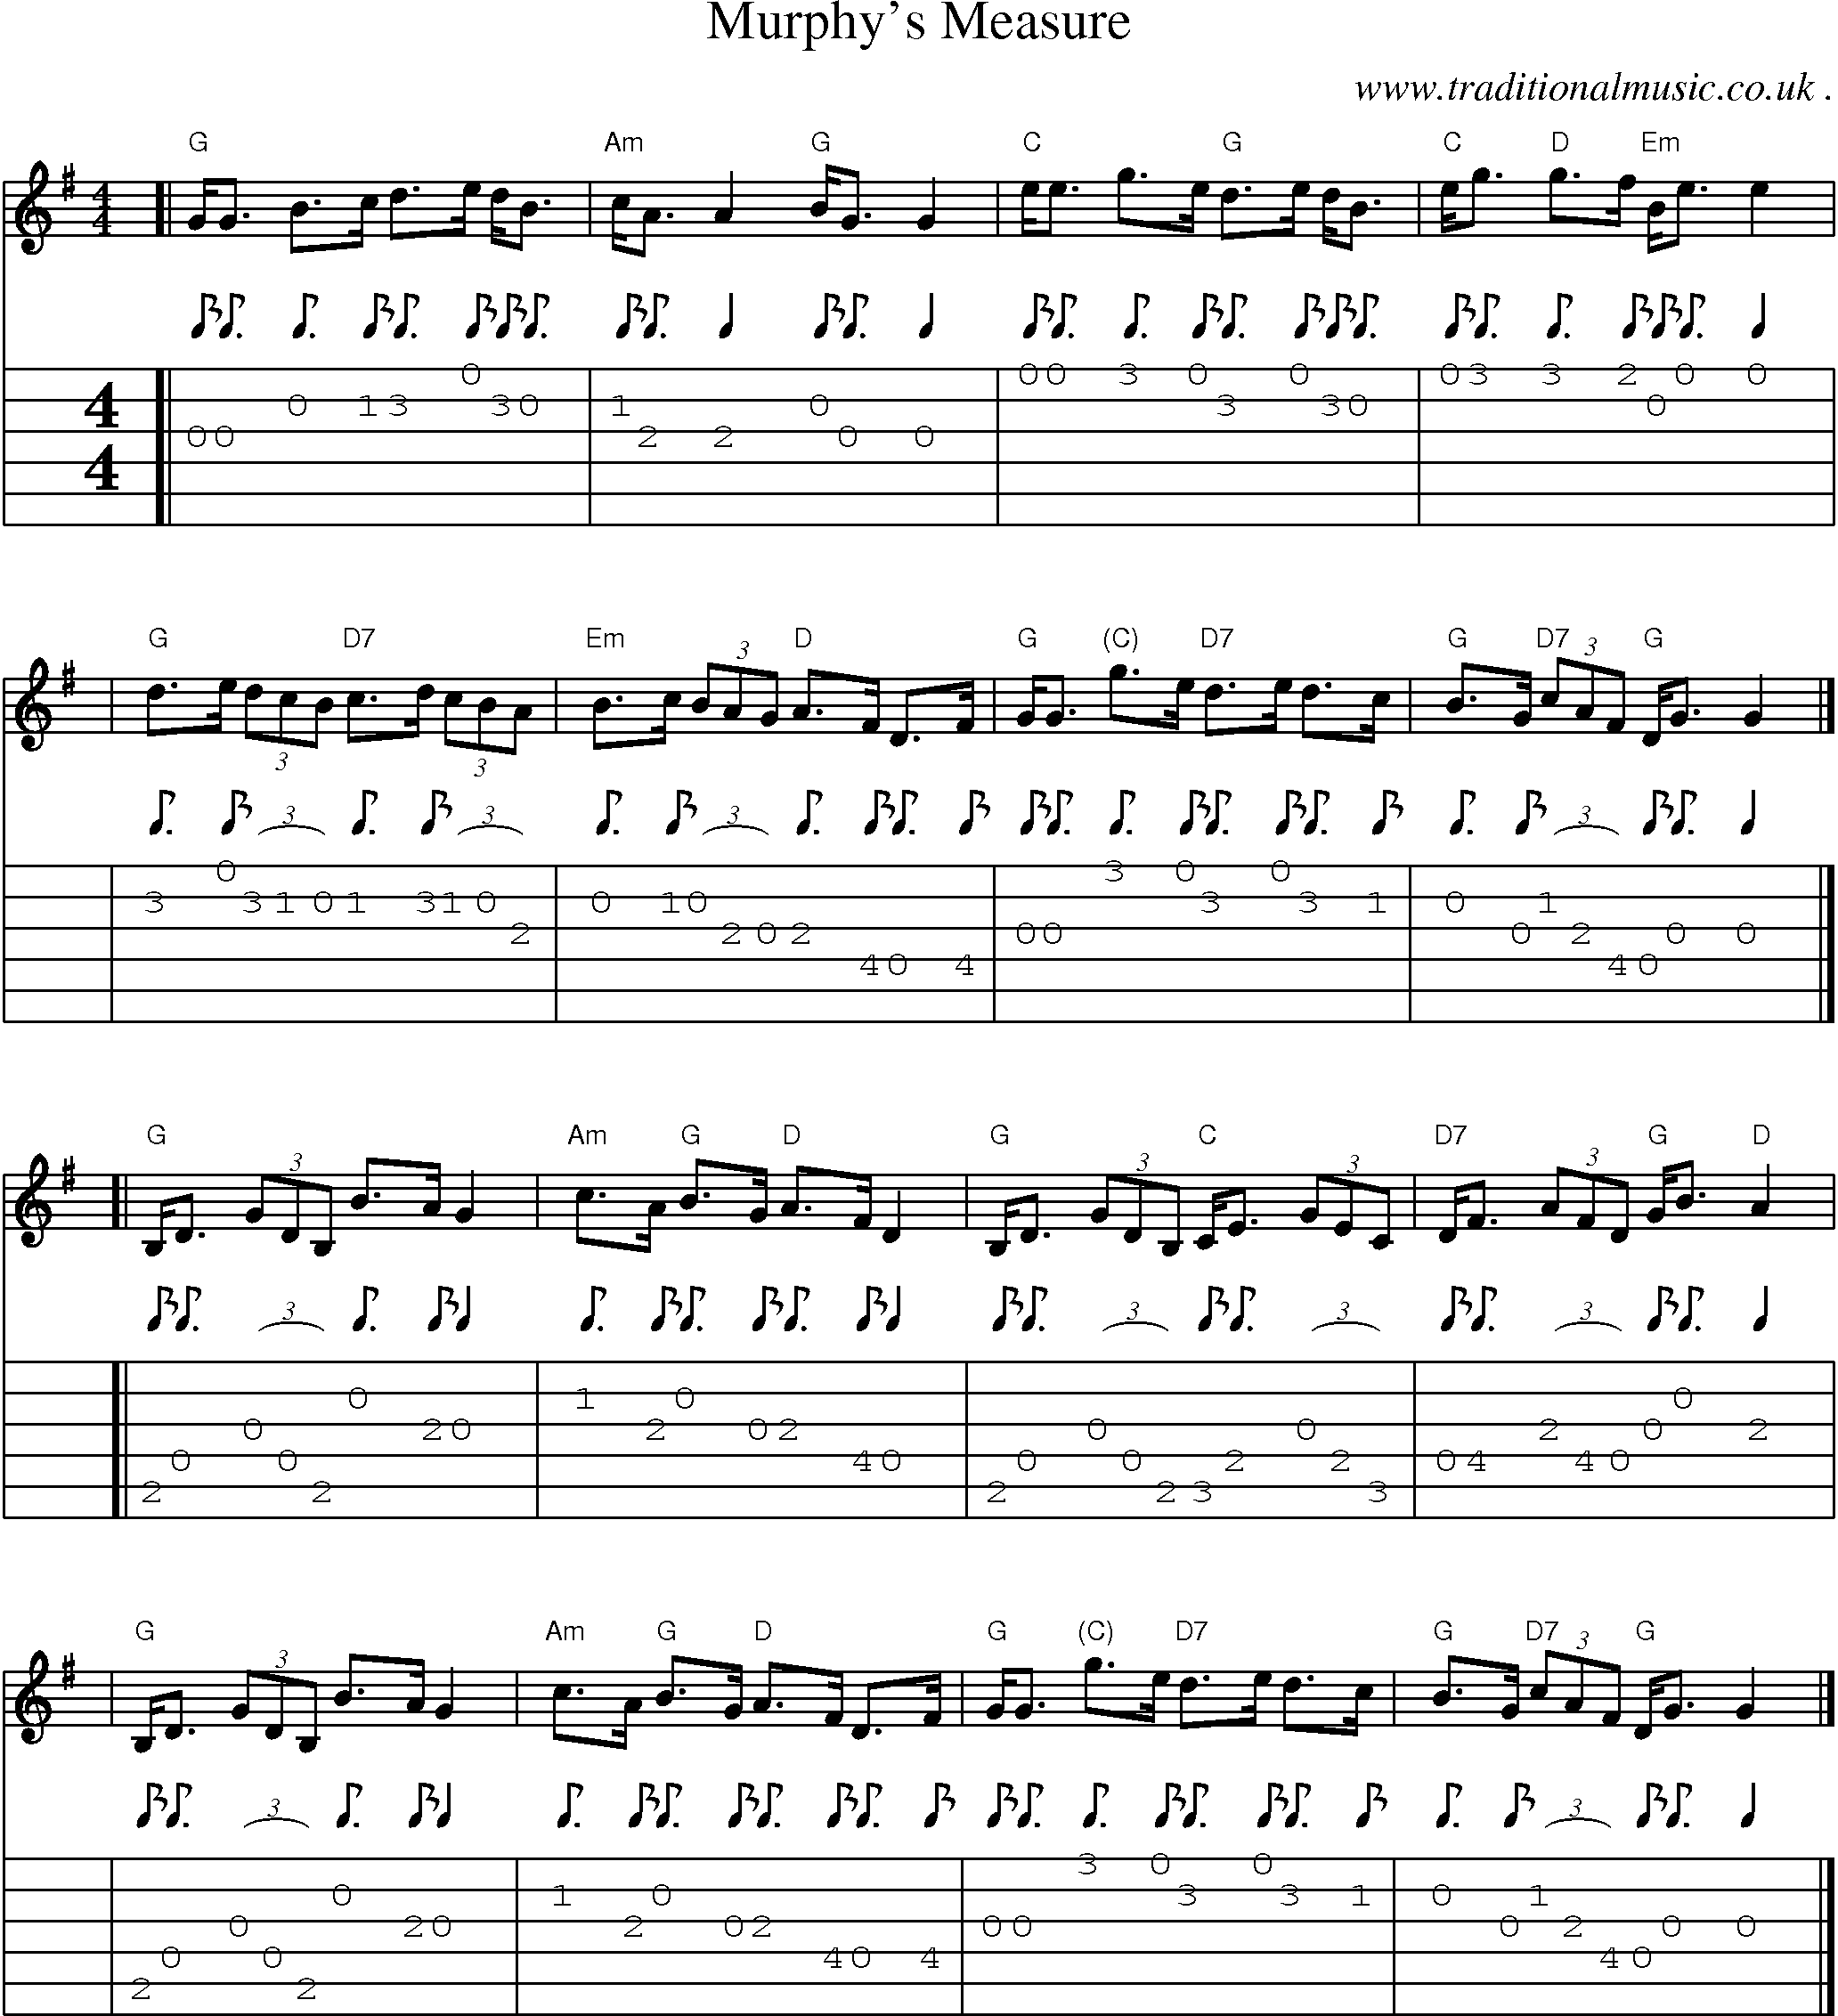 Sheet-music  score, Chords and Guitar Tabs for Murphys Measure